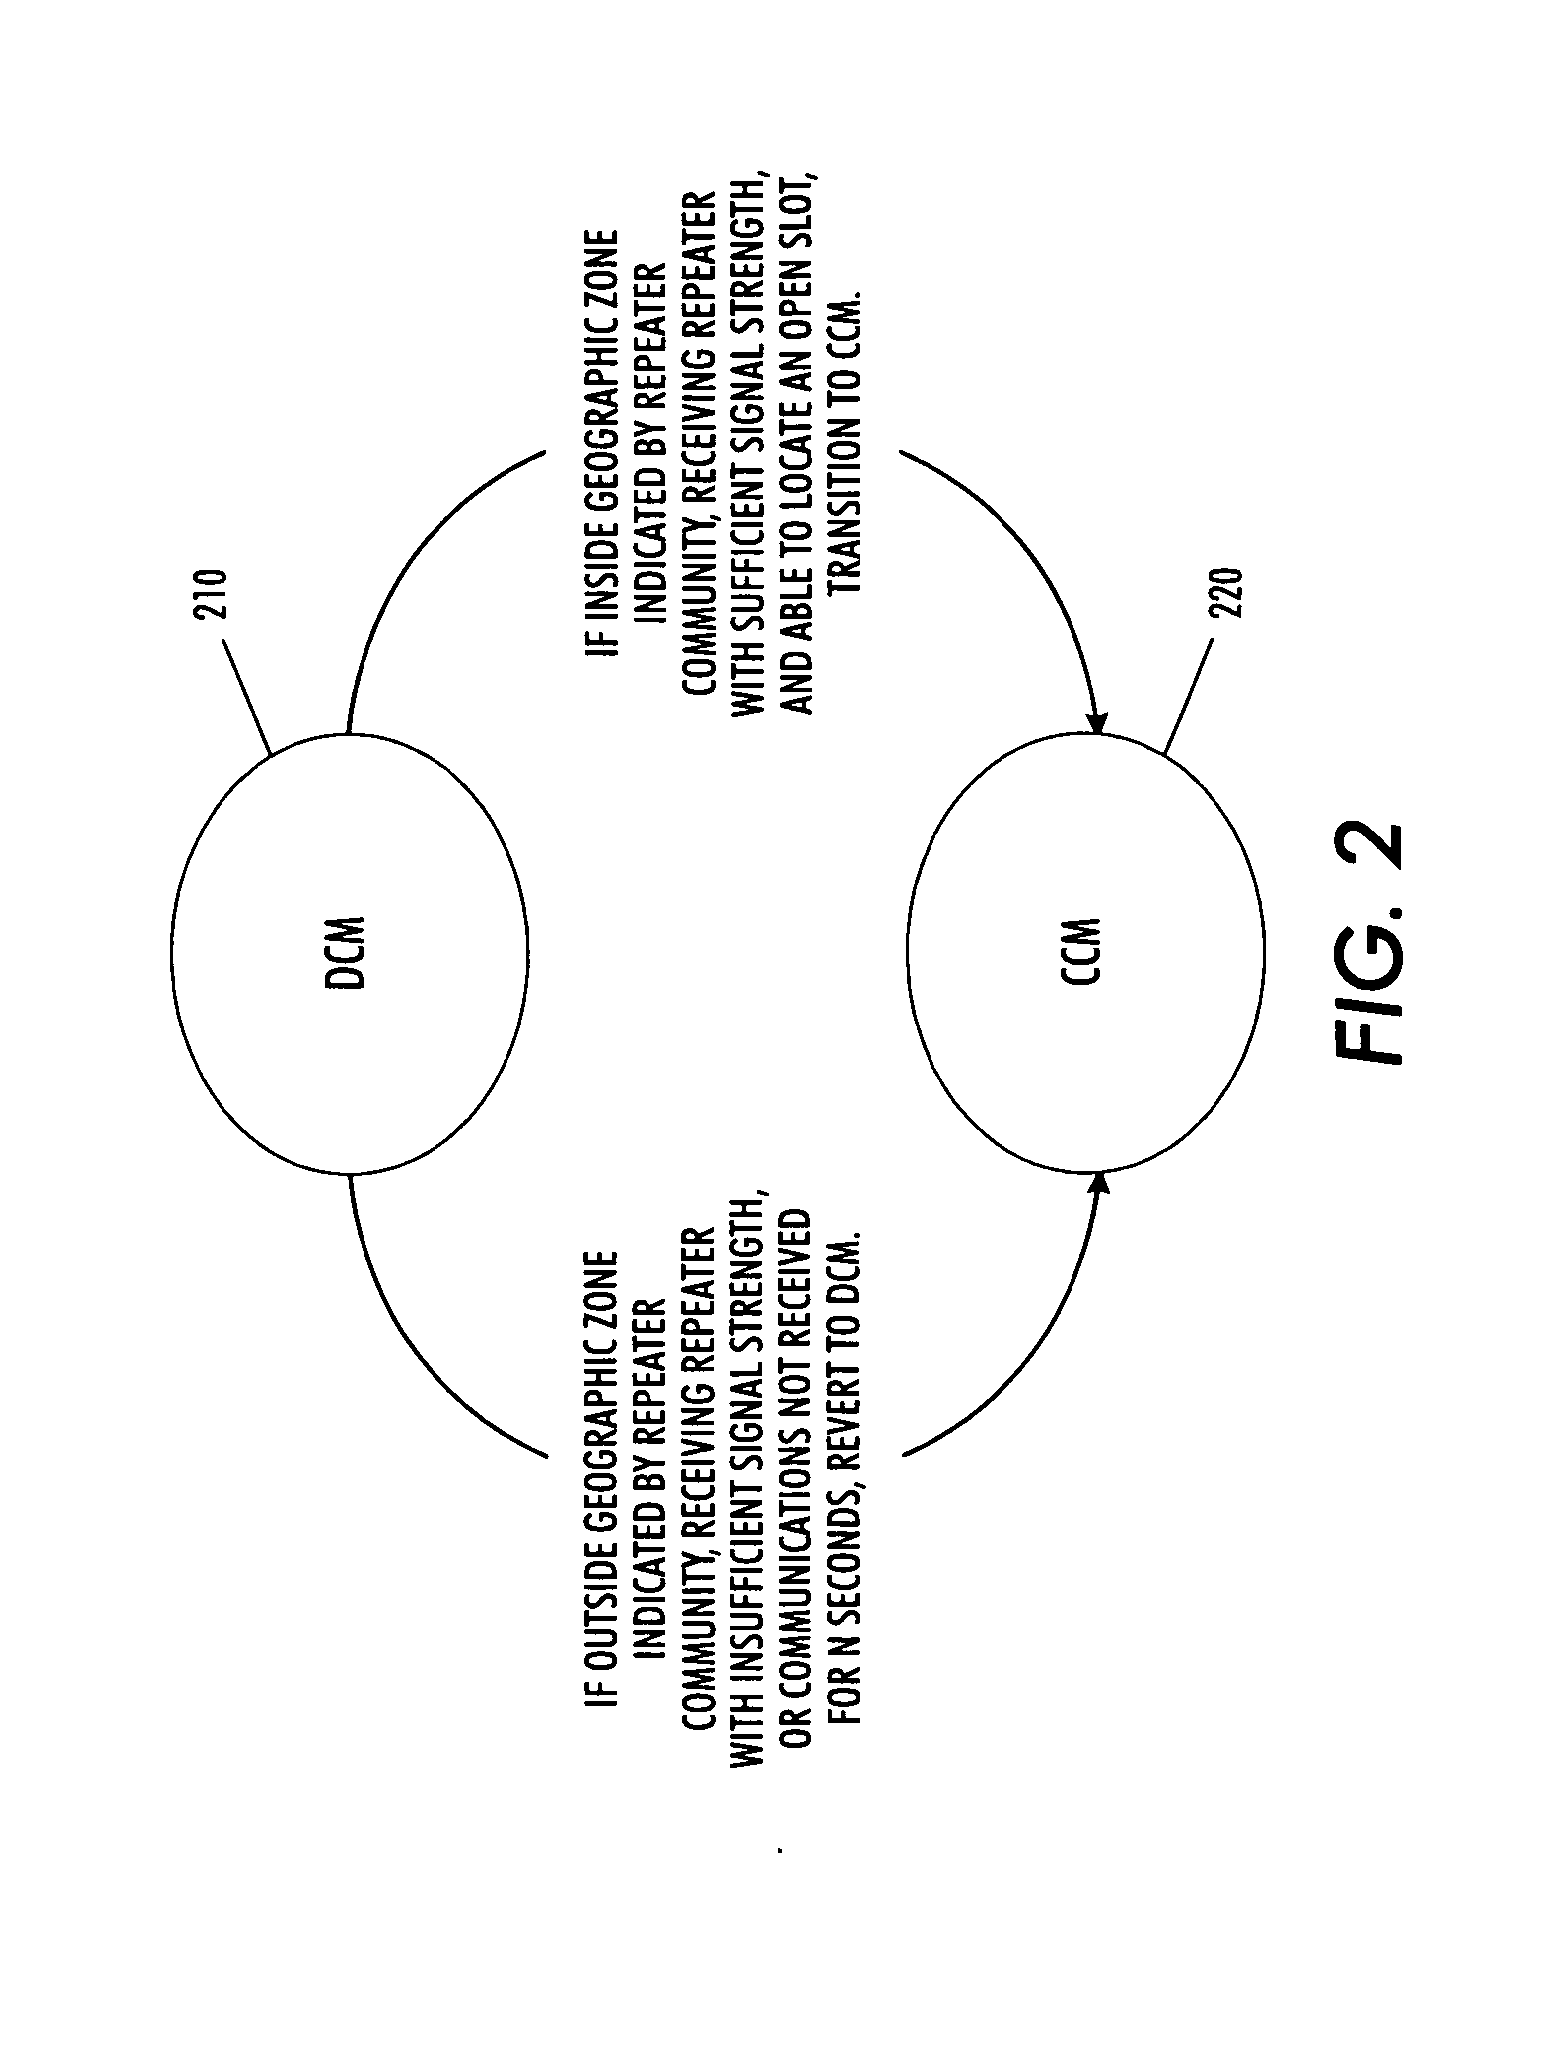 System and method for remote control of locomotives